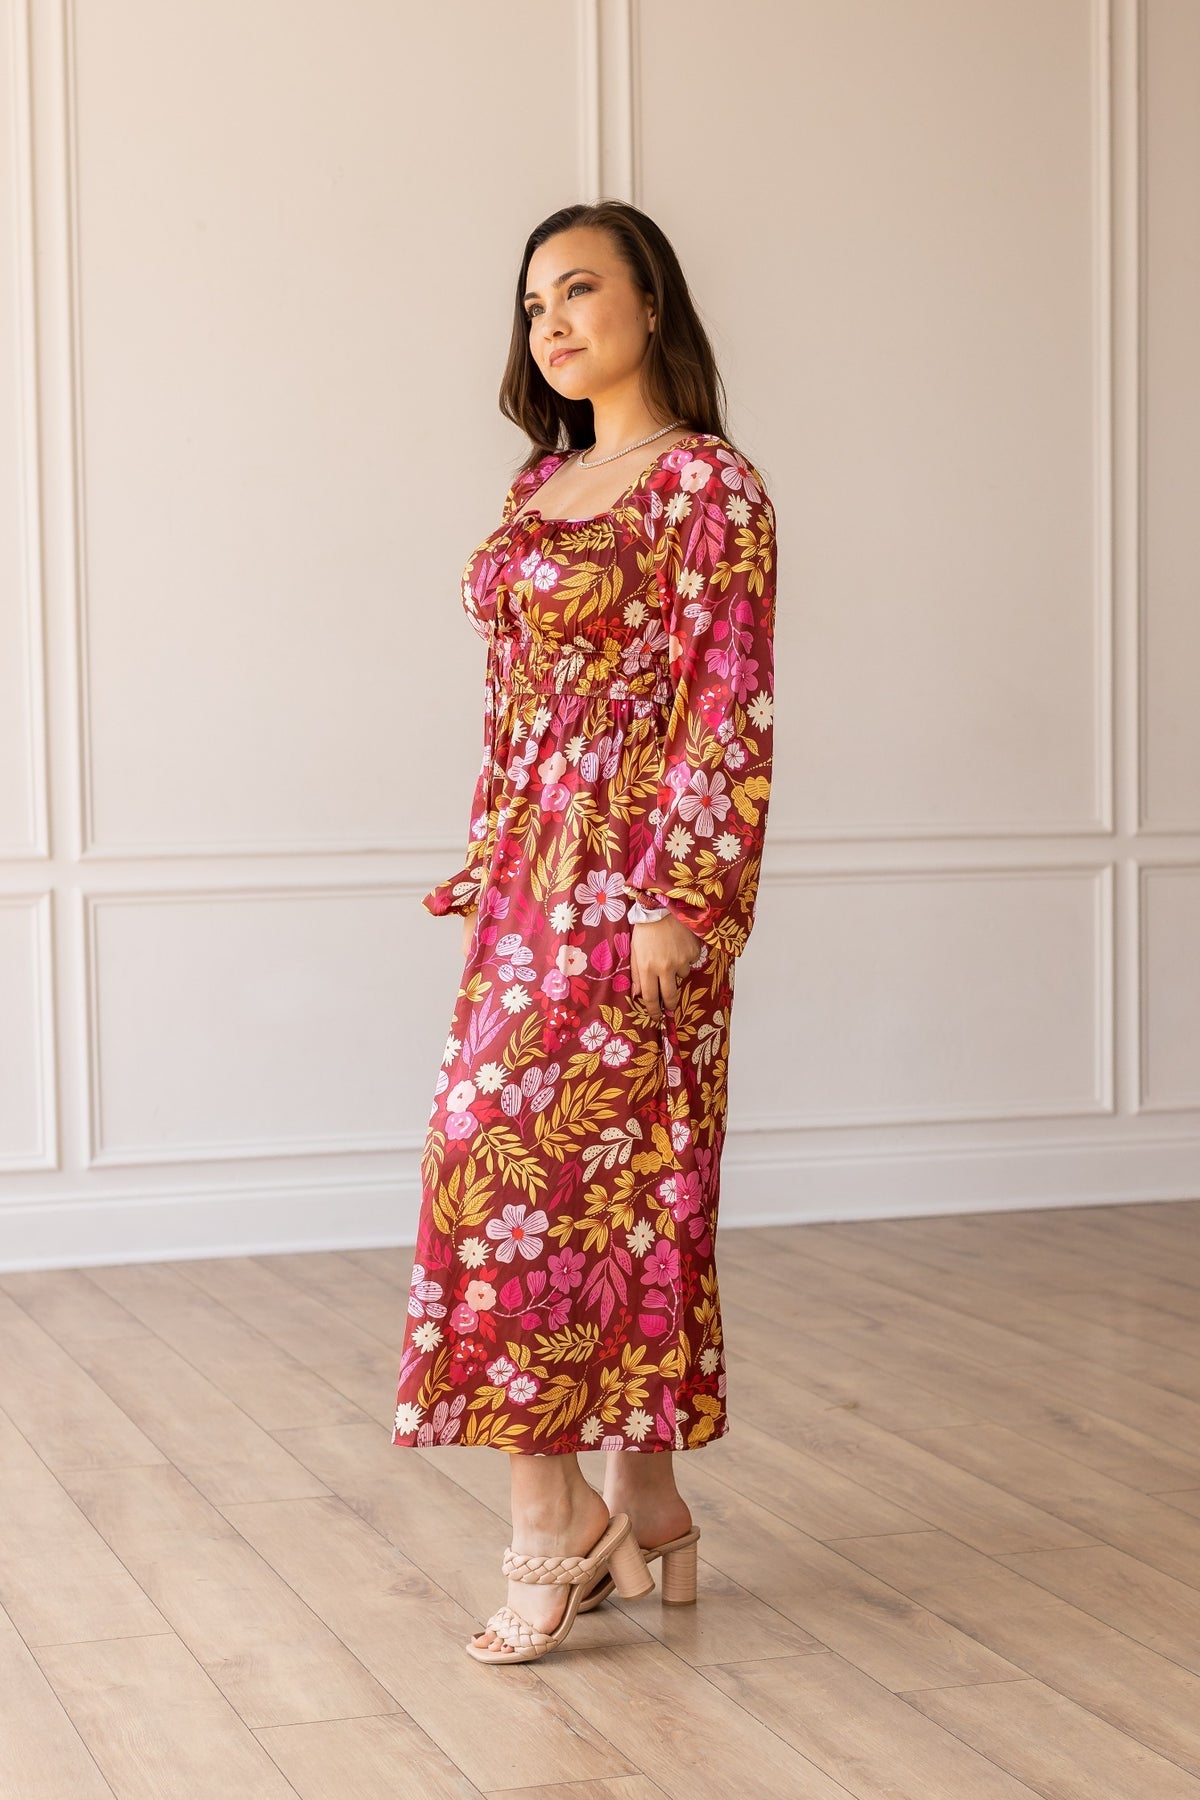 The Jeanette Maxi Dress